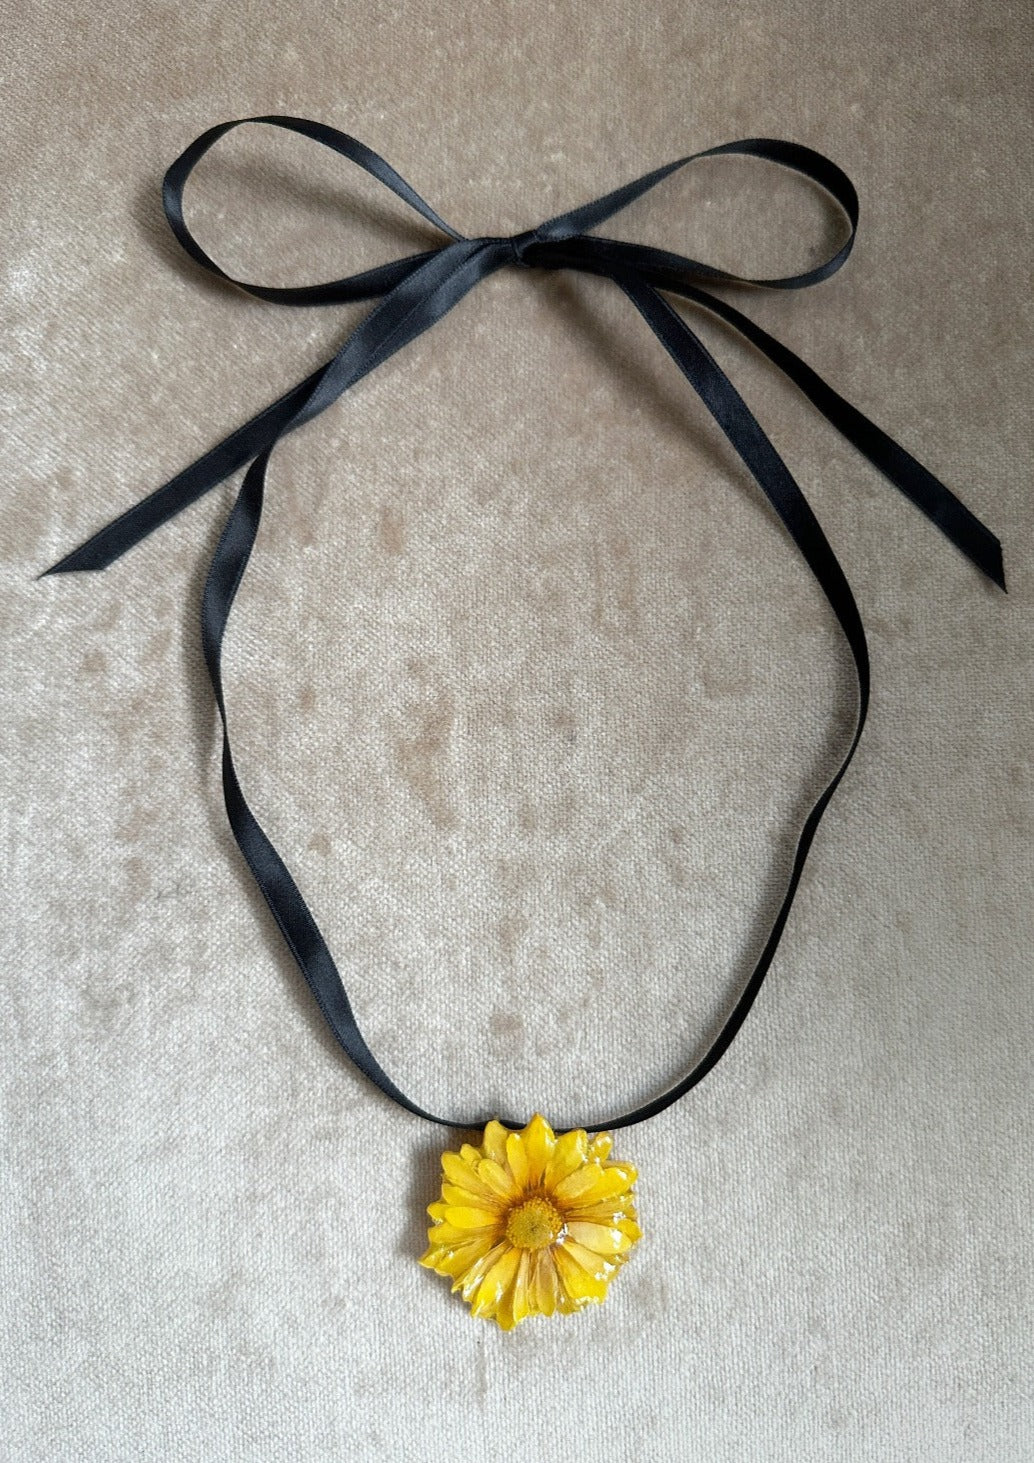 Yellow daisy preserved in resin and suspended from a black satin ribbon.